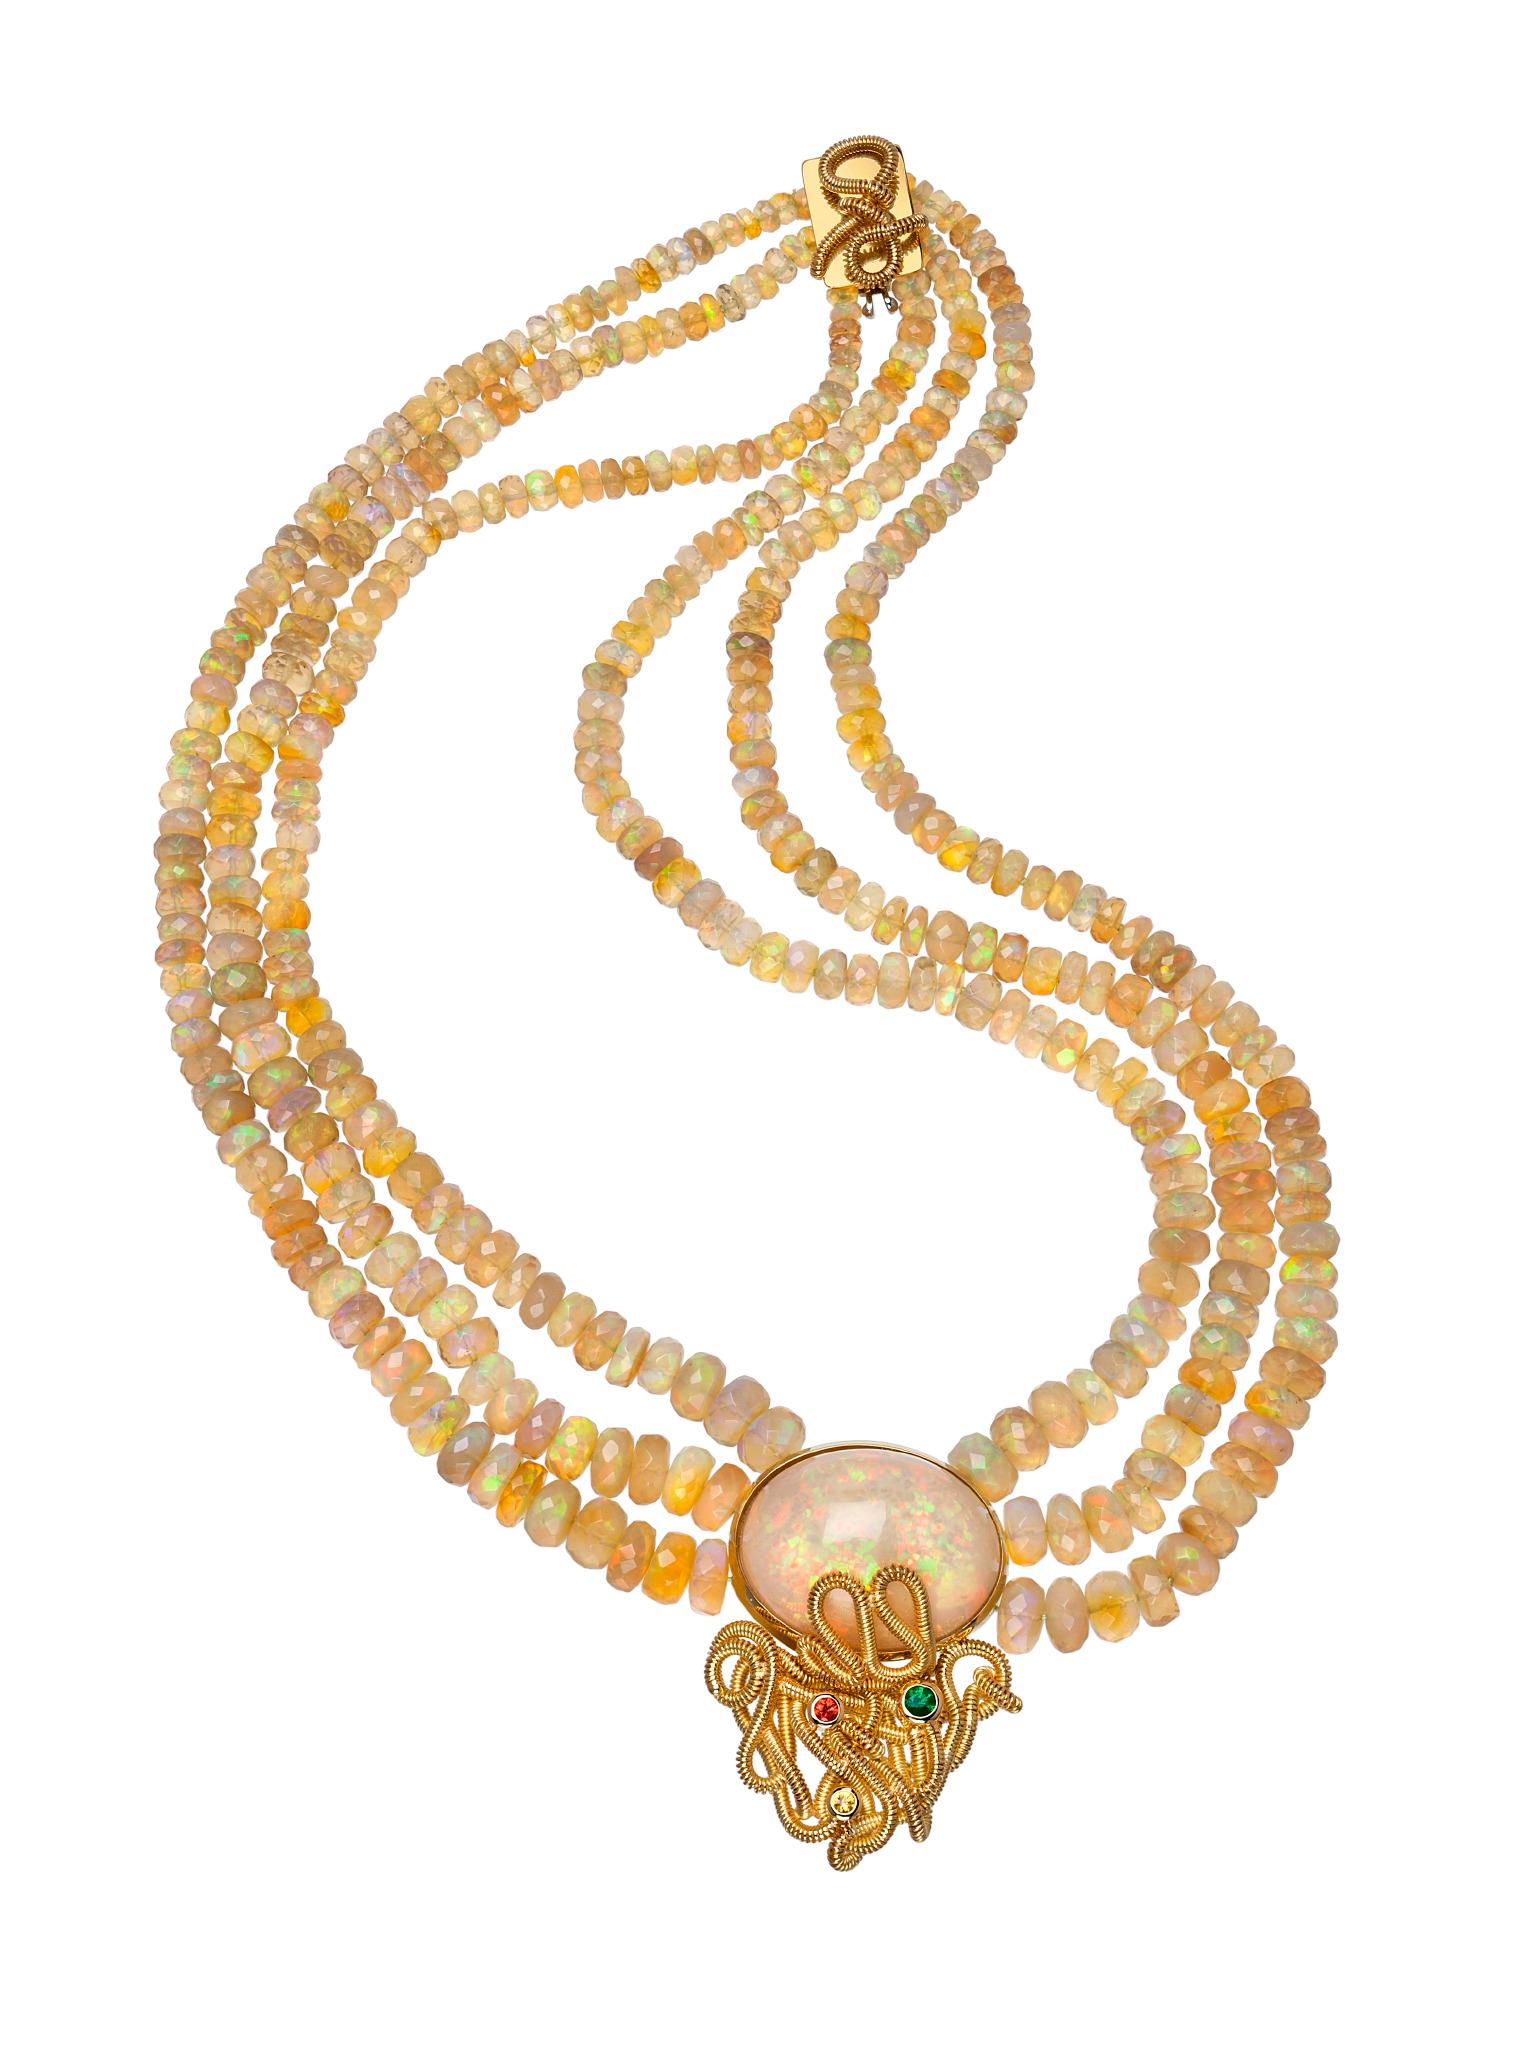 Oval Cut 18k Gold Oval Ethiopian Opal Necklace with Coloured Sapphires and Emeralds For Sale